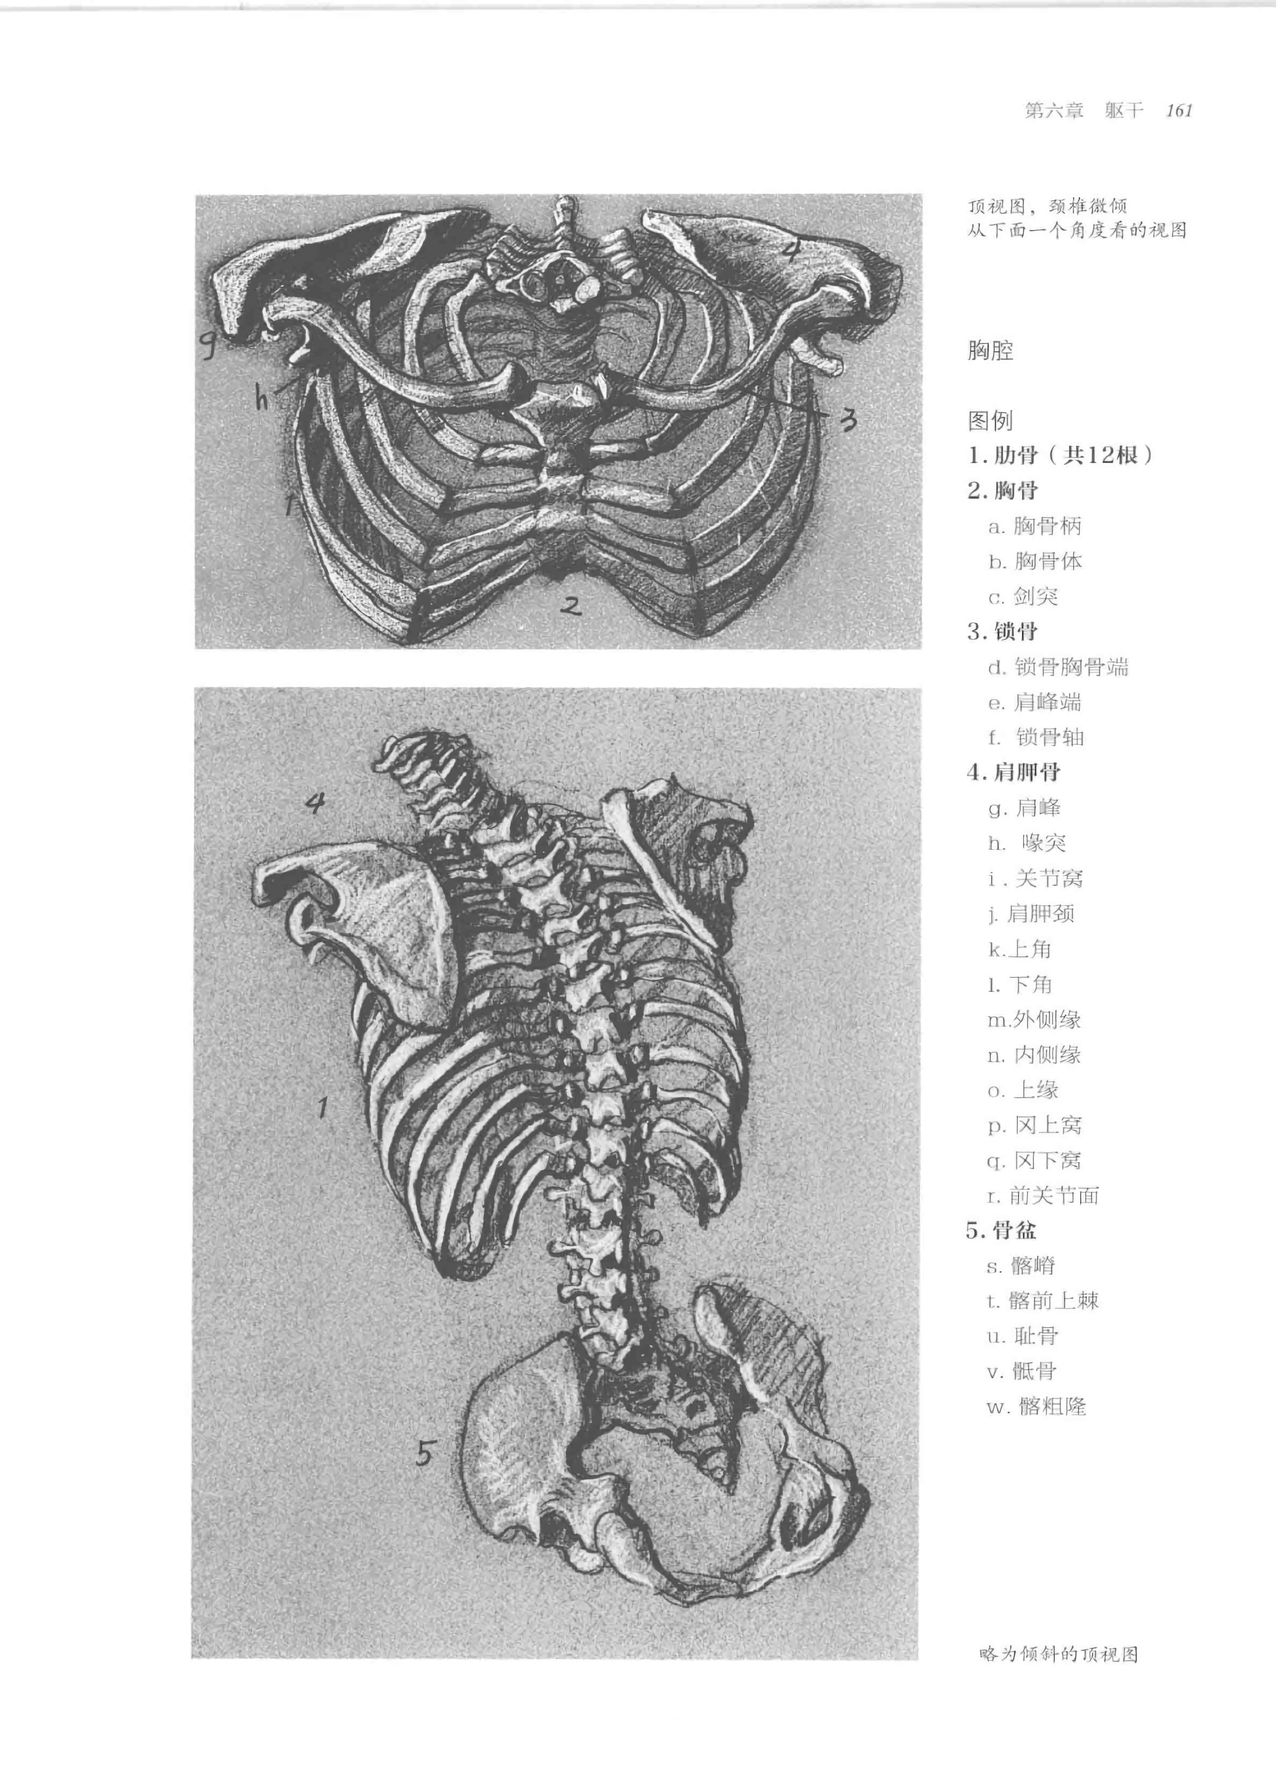 Anatomy-A Complete Guide for Artists - Joseph Sheppard [Chinese] 161